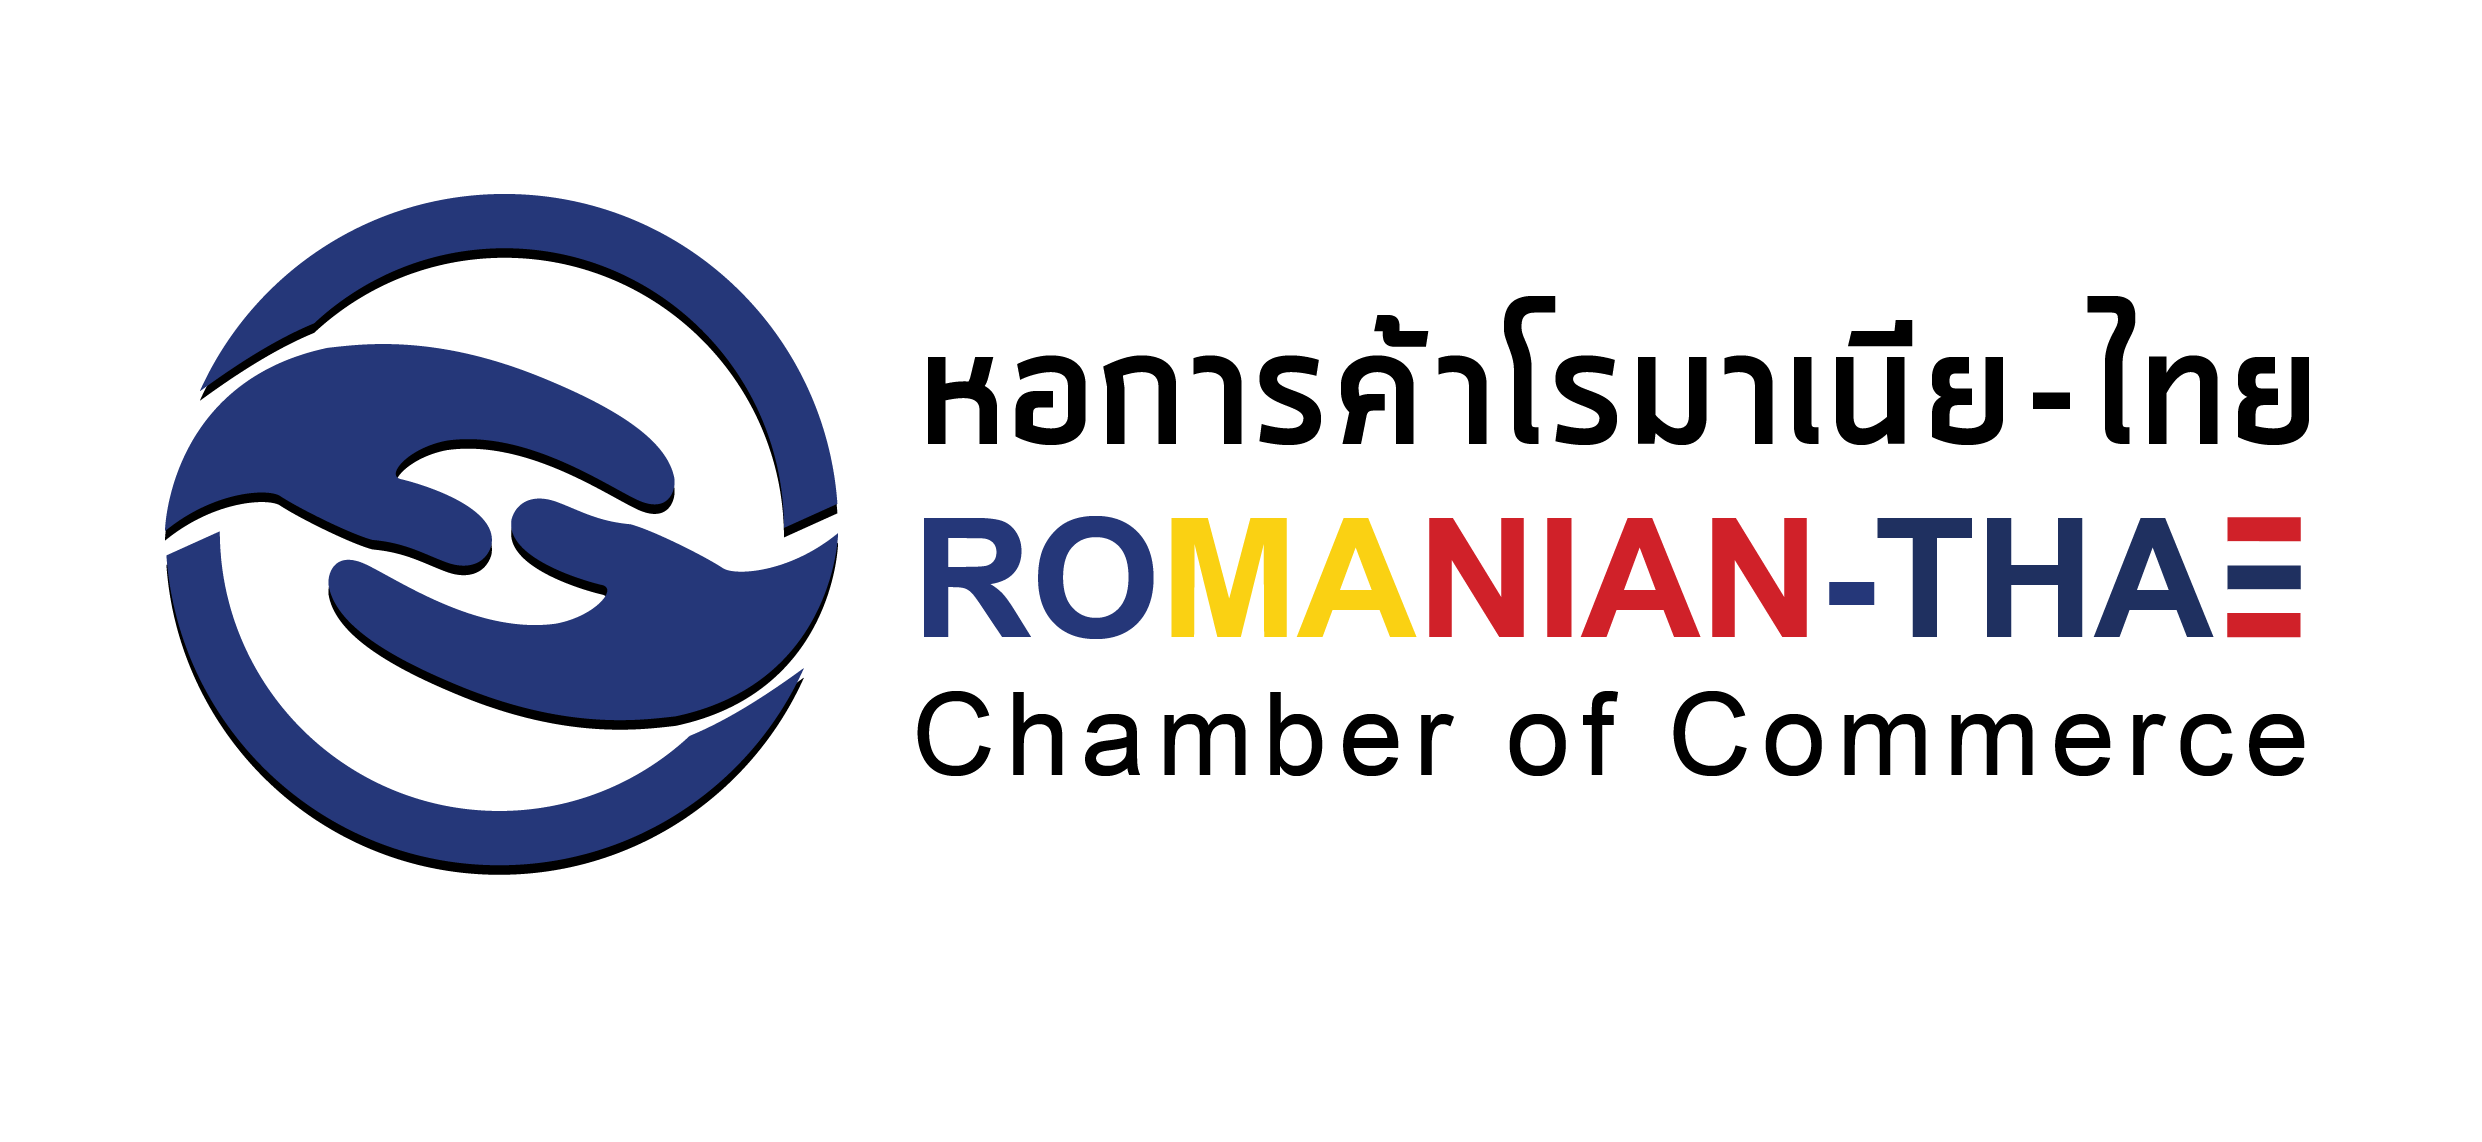 The Romanian - Thai Chamber of Commerce (RTCC)